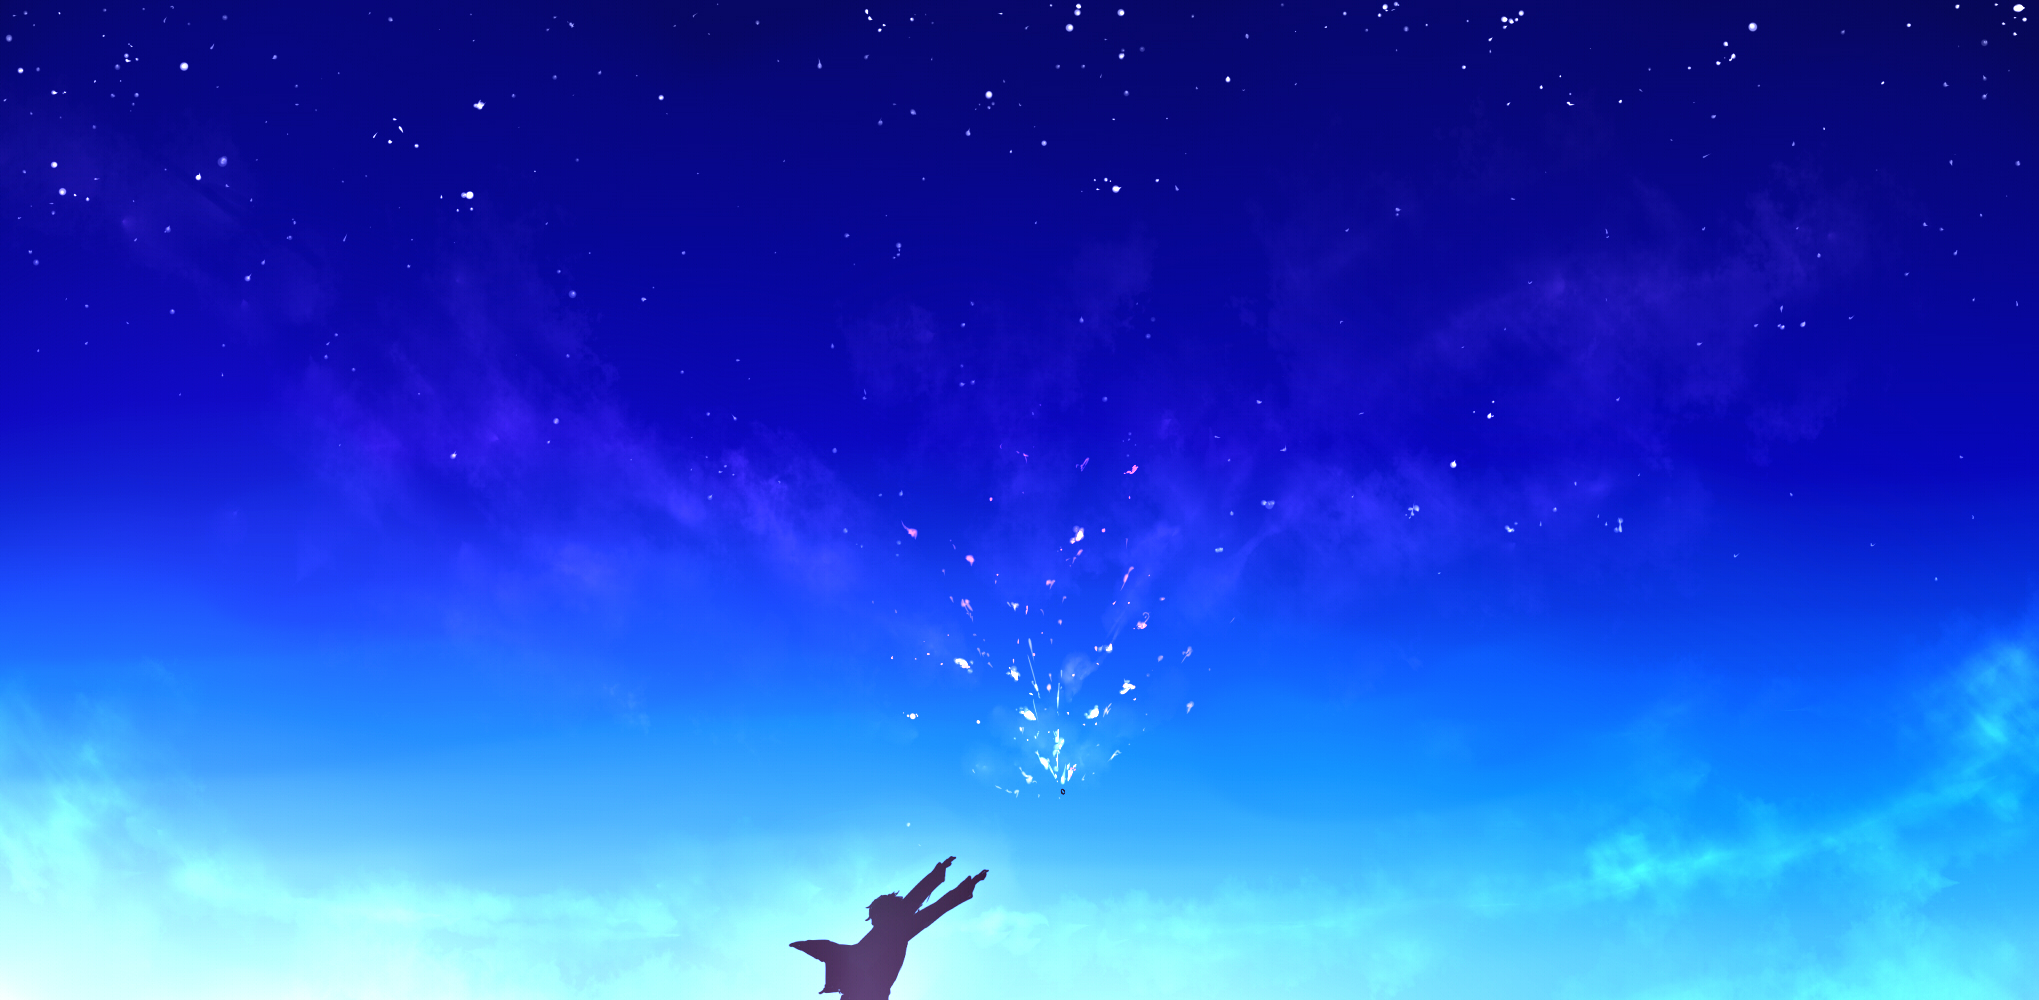 Beyond The Boundary Wallpaper And Background